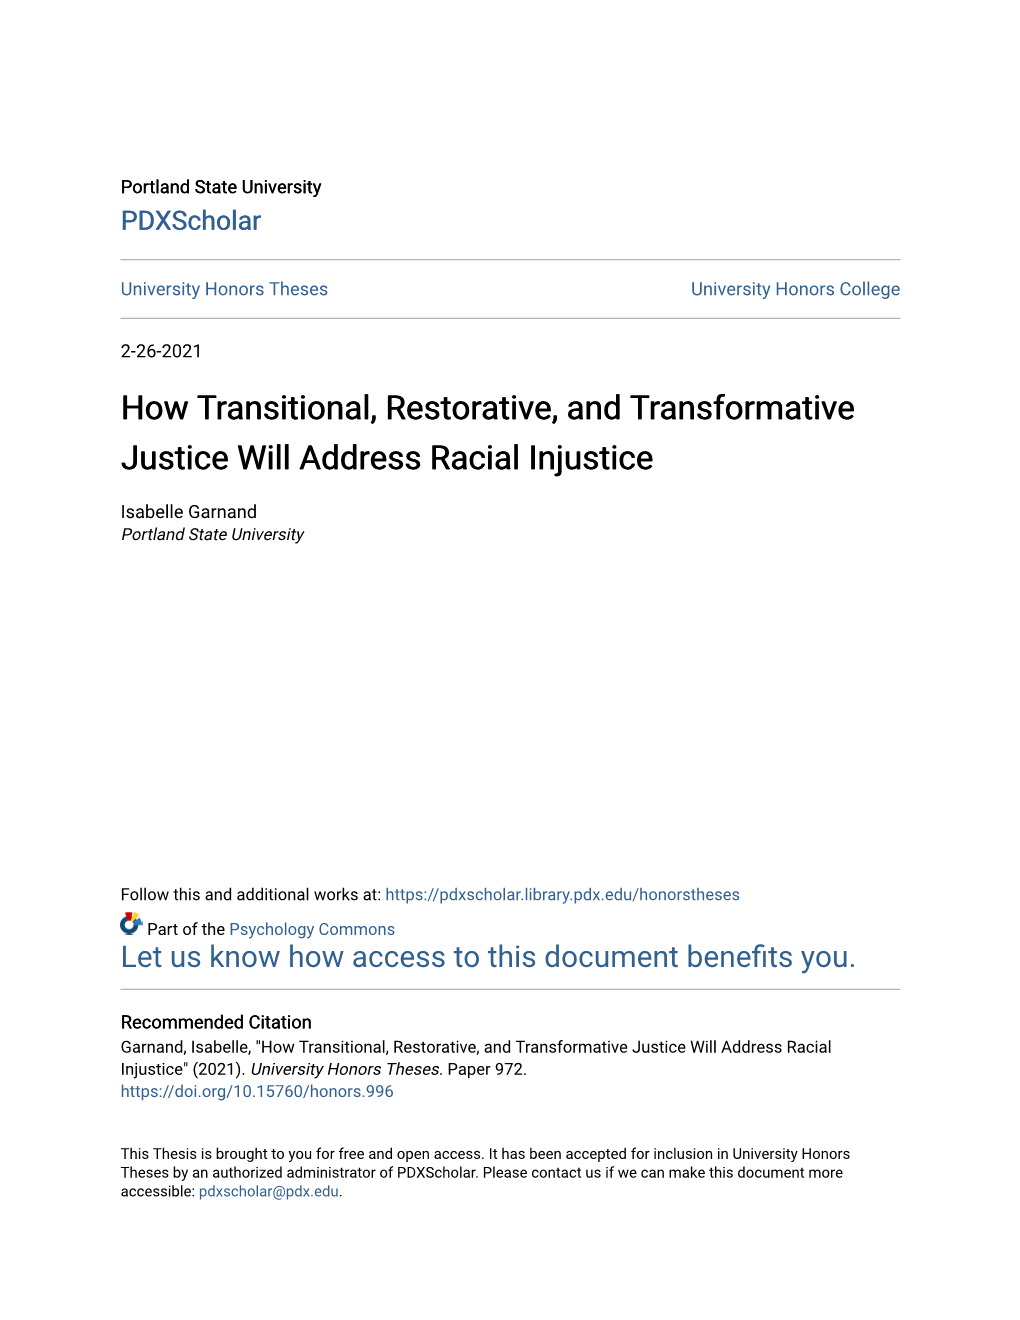 How Transitional, Restorative, and Transformative Justice Will Address Racial Injustice